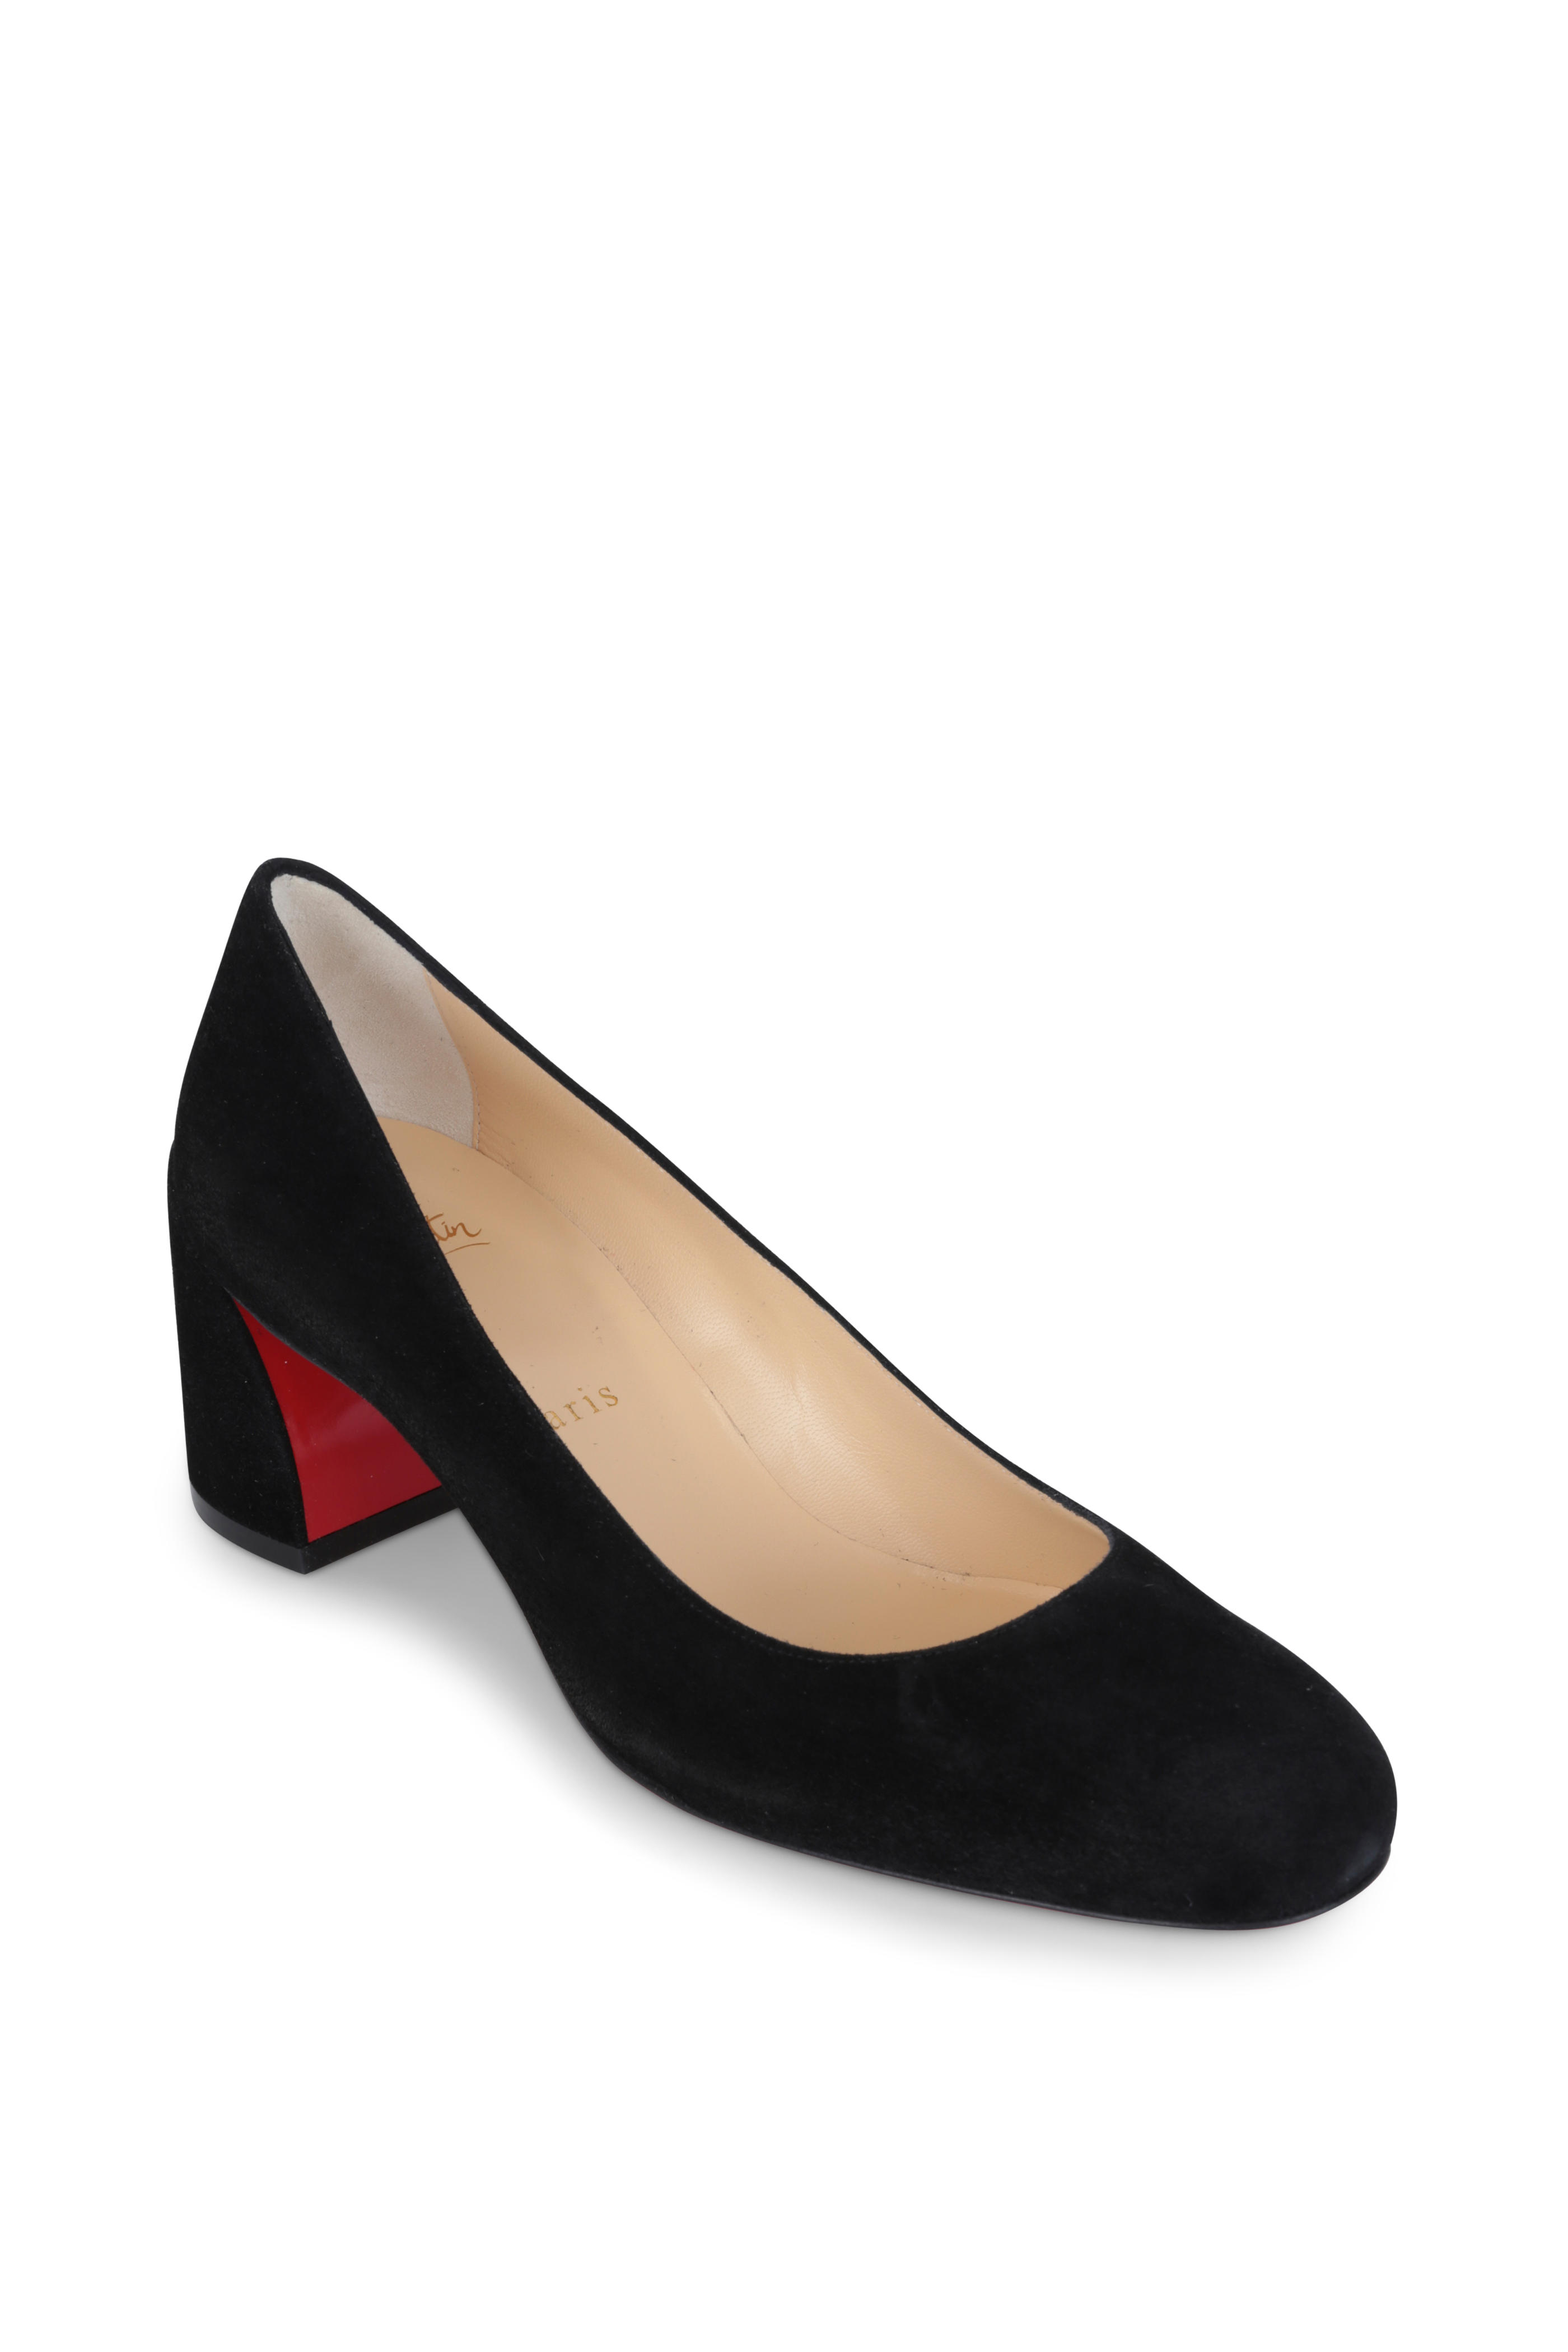 Louboutin real miss 7 easy